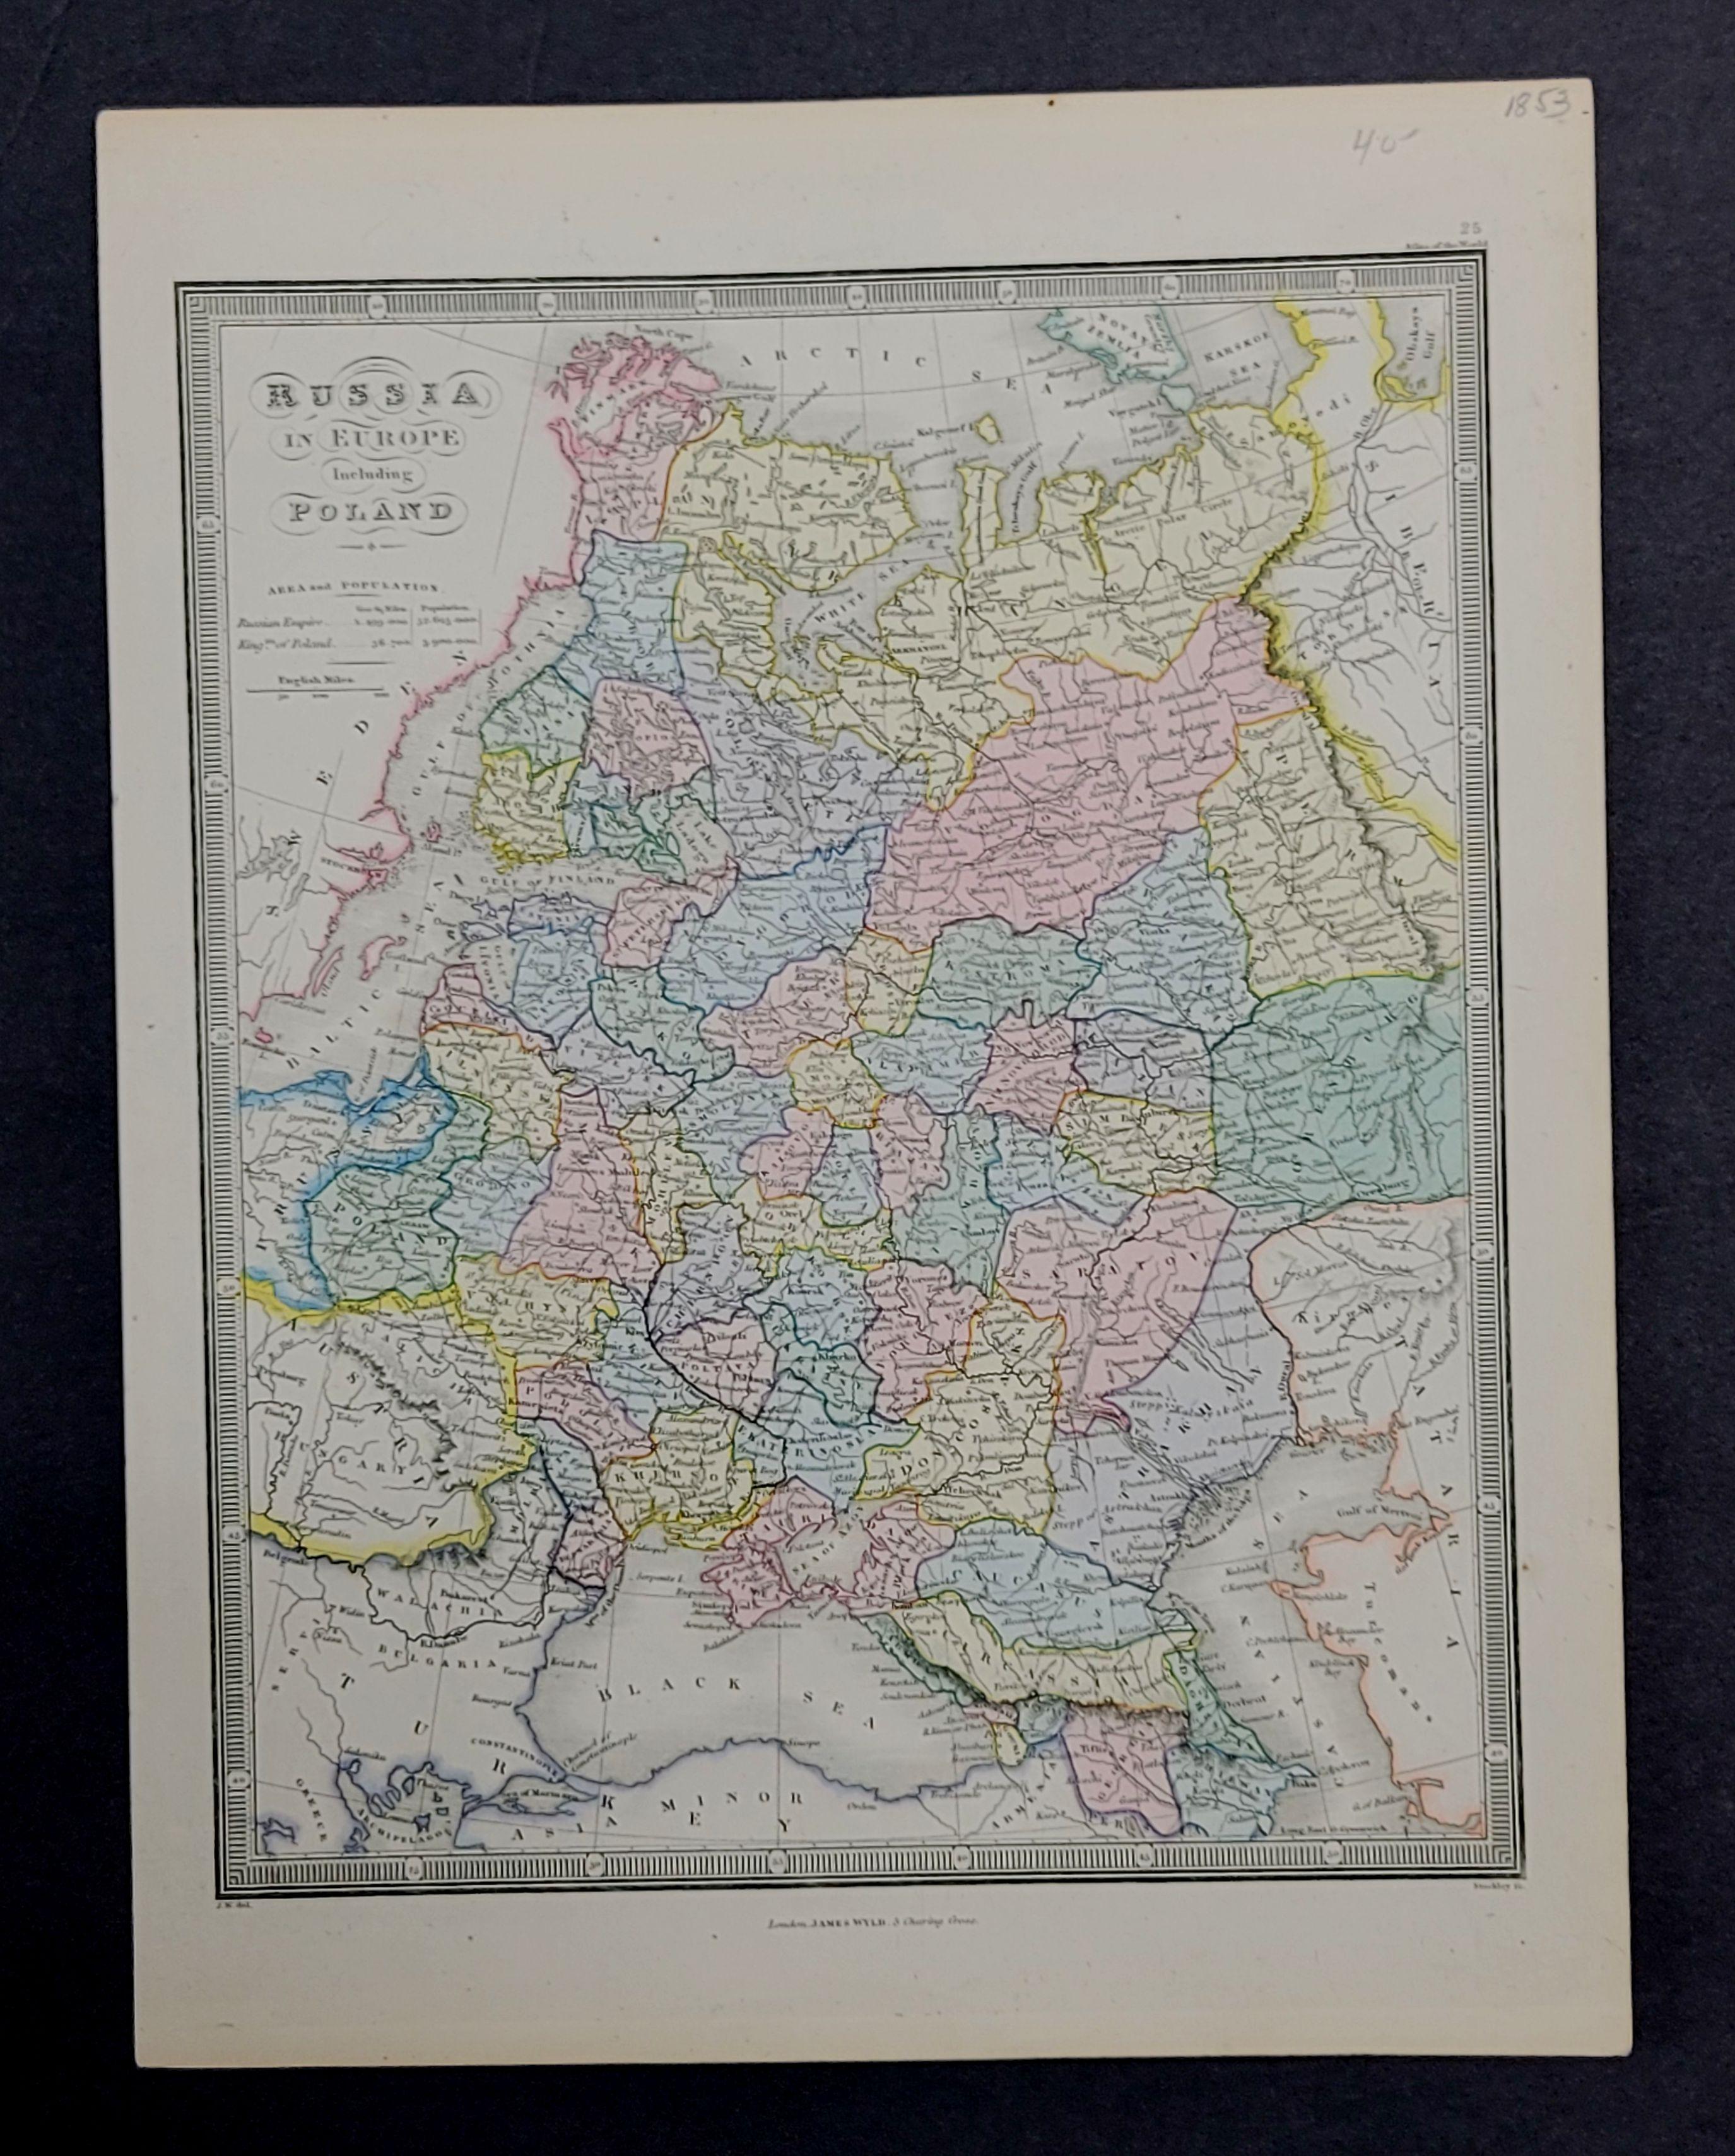 Description

Russia in Europe incl. Poland by J Wyld c.1853

Hand coloured steel engraving
 
 Dimension: Paper: 25 cm W x 33 cm H ; Sight: 22 cm W x 28 cm H

Condition: Good Condition with aged toning, please see photos.